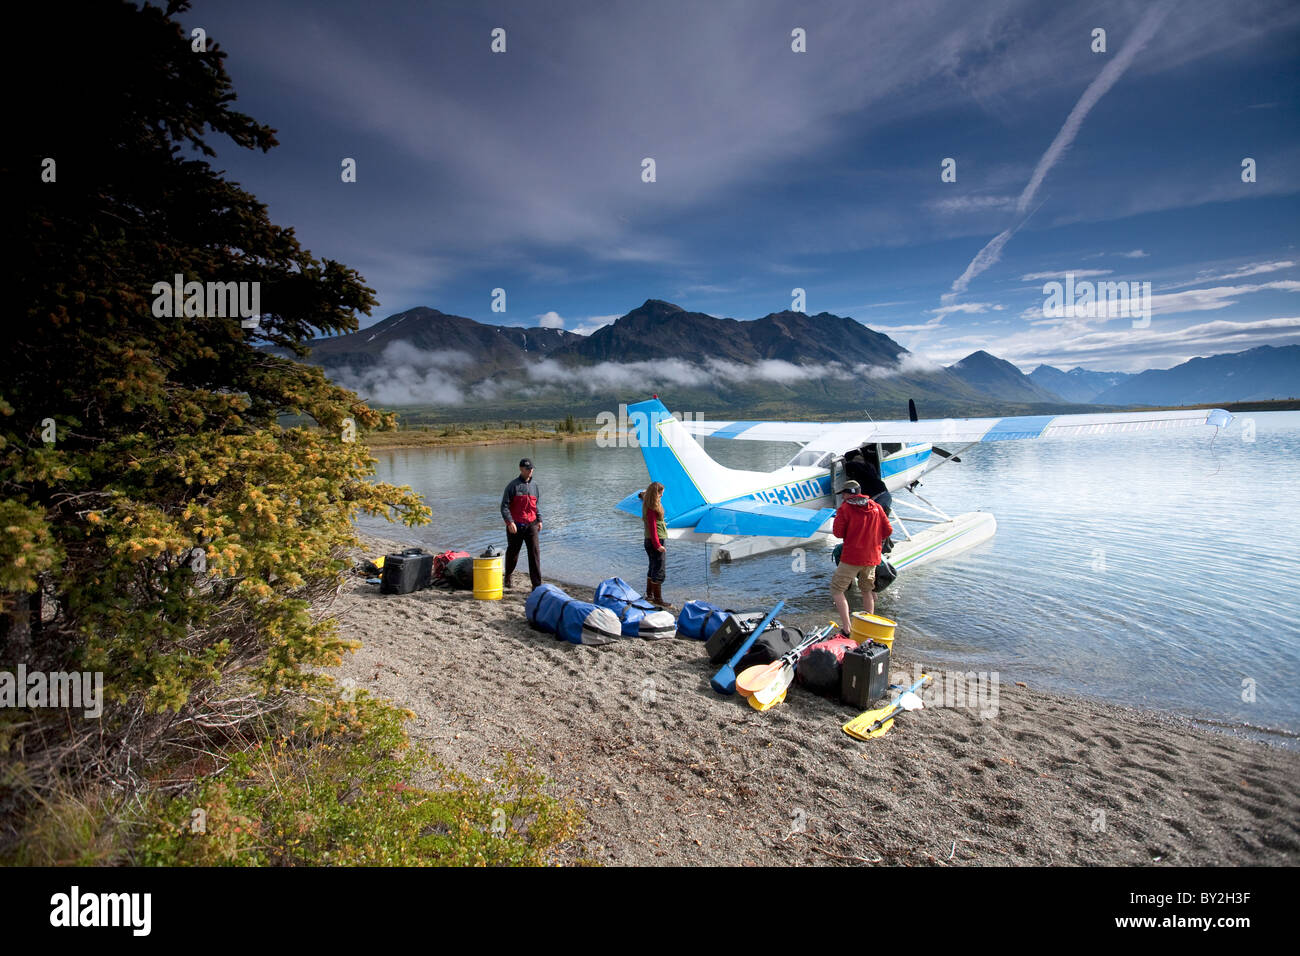 Two men and one woman unload gear from a plane on a lake in Alaska. Stock Photo